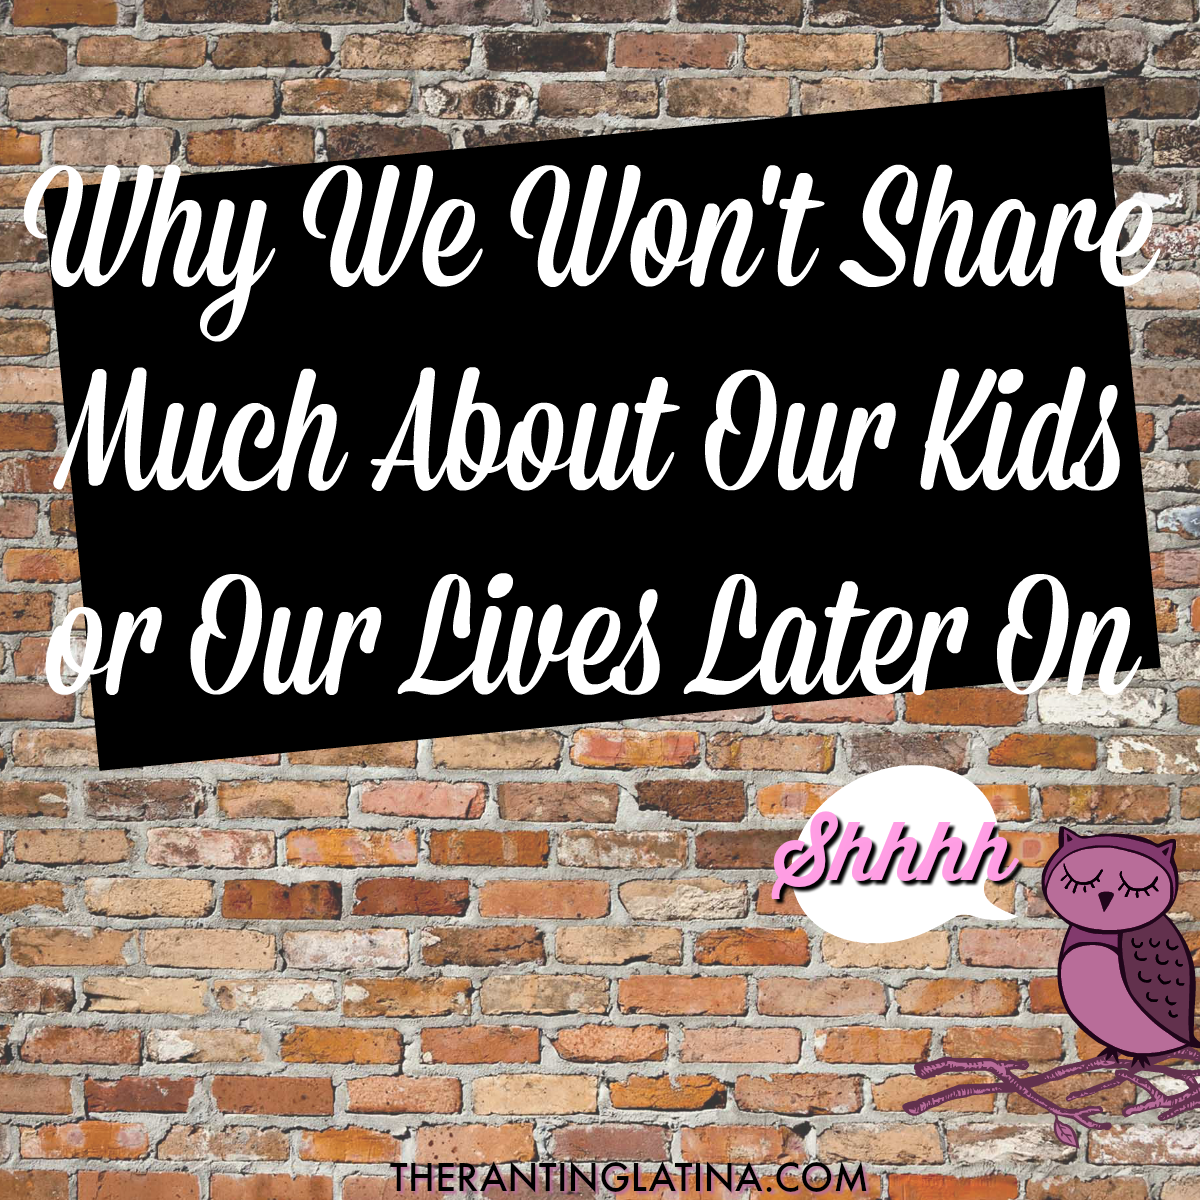 Why we won't share much about our kids or our lives